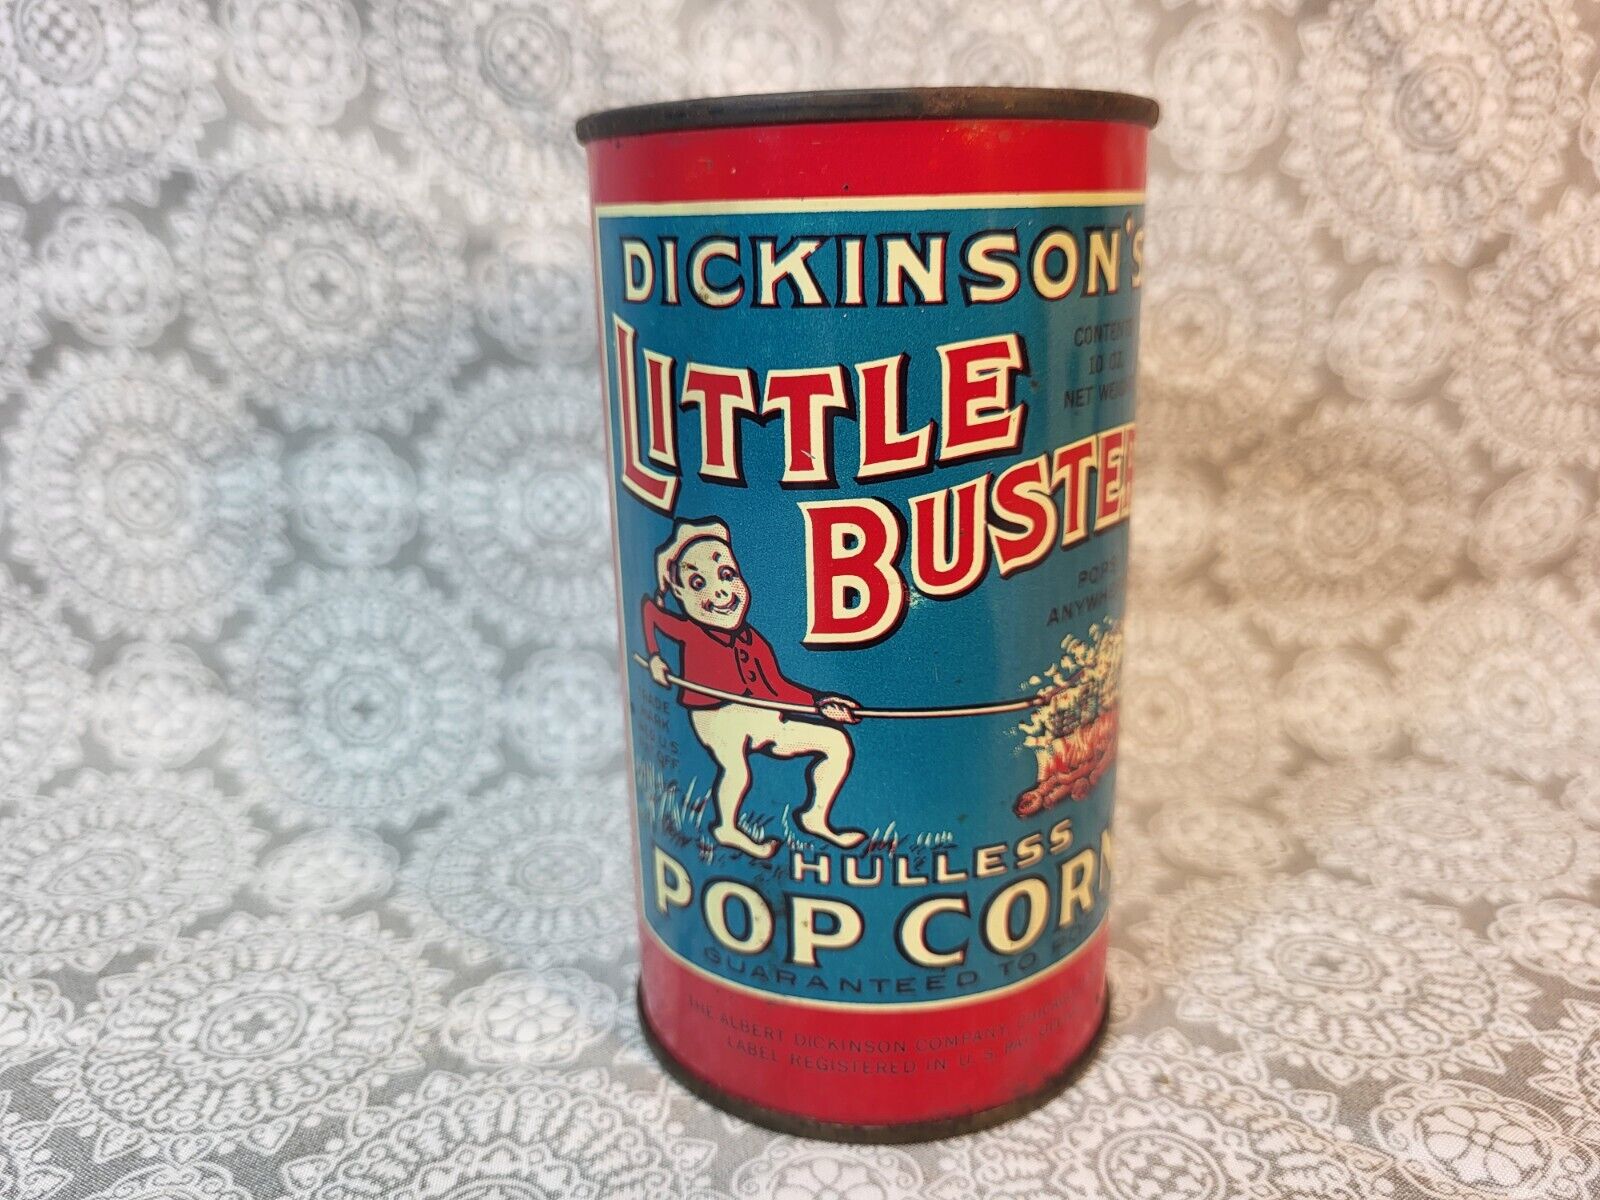 Vintage 10 oz Dickinson's Little Buster popcorn tin can full-unopened Nice